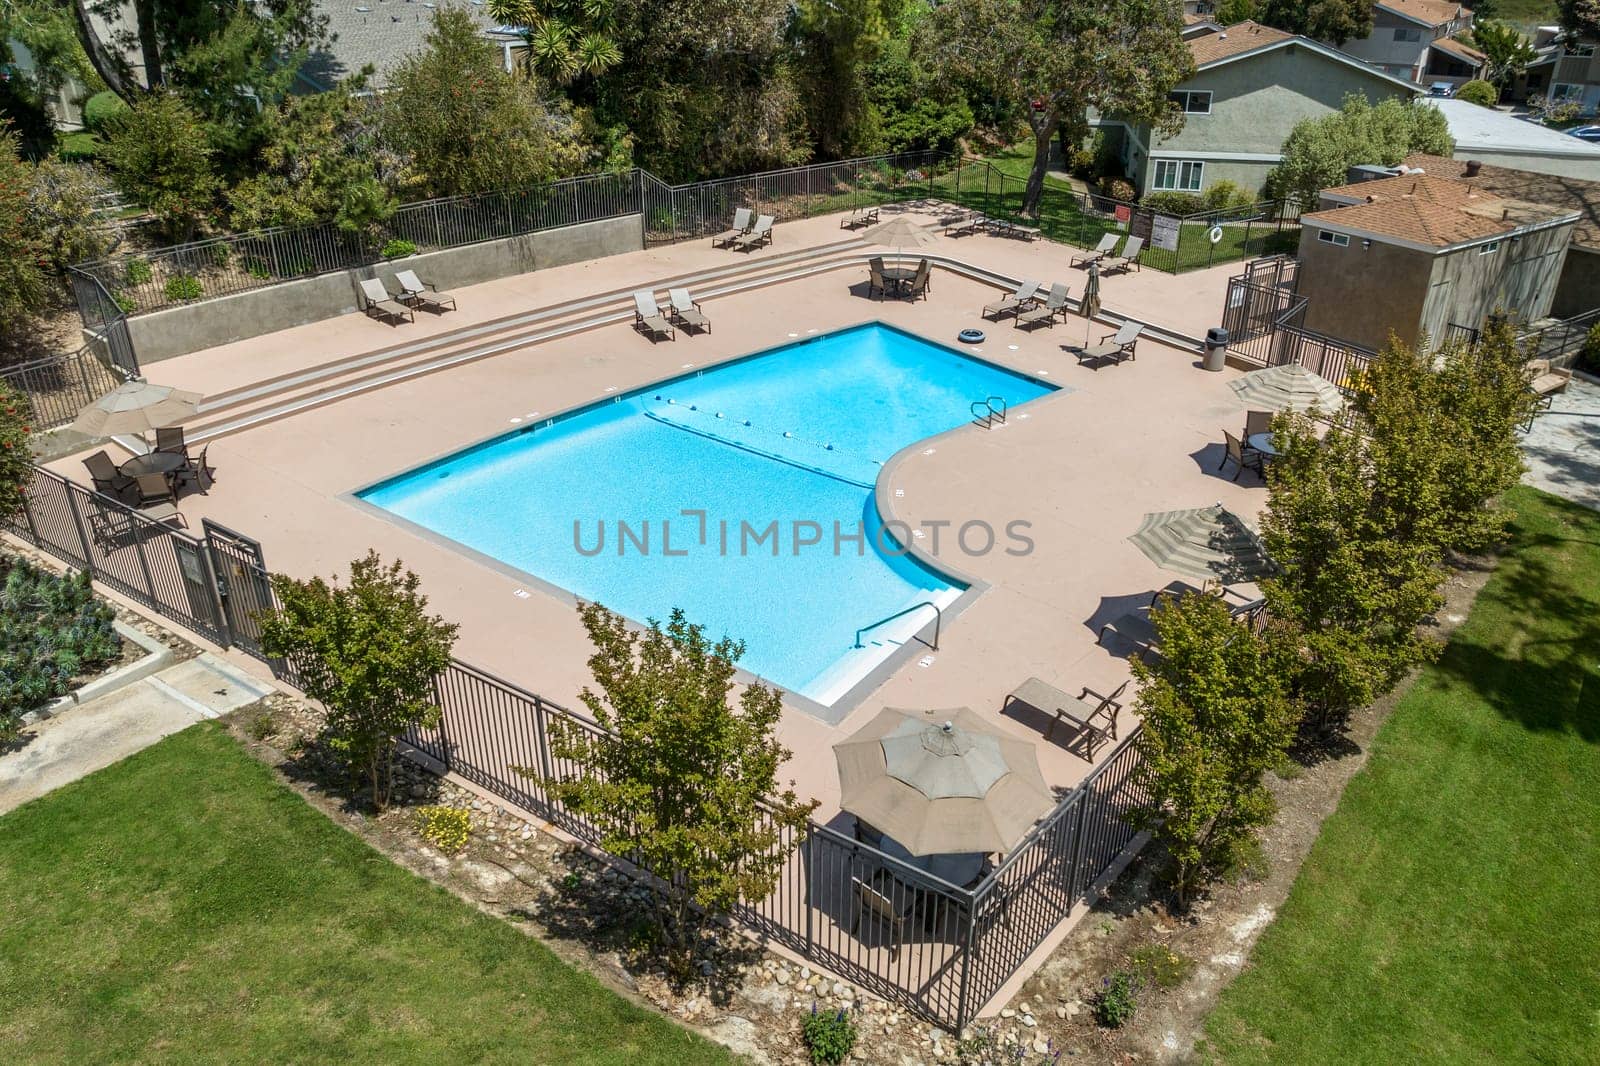 Aerial view of recreational facilities with swimming pool in private residential community in La Jolla, California, USA. April 15st, 2022